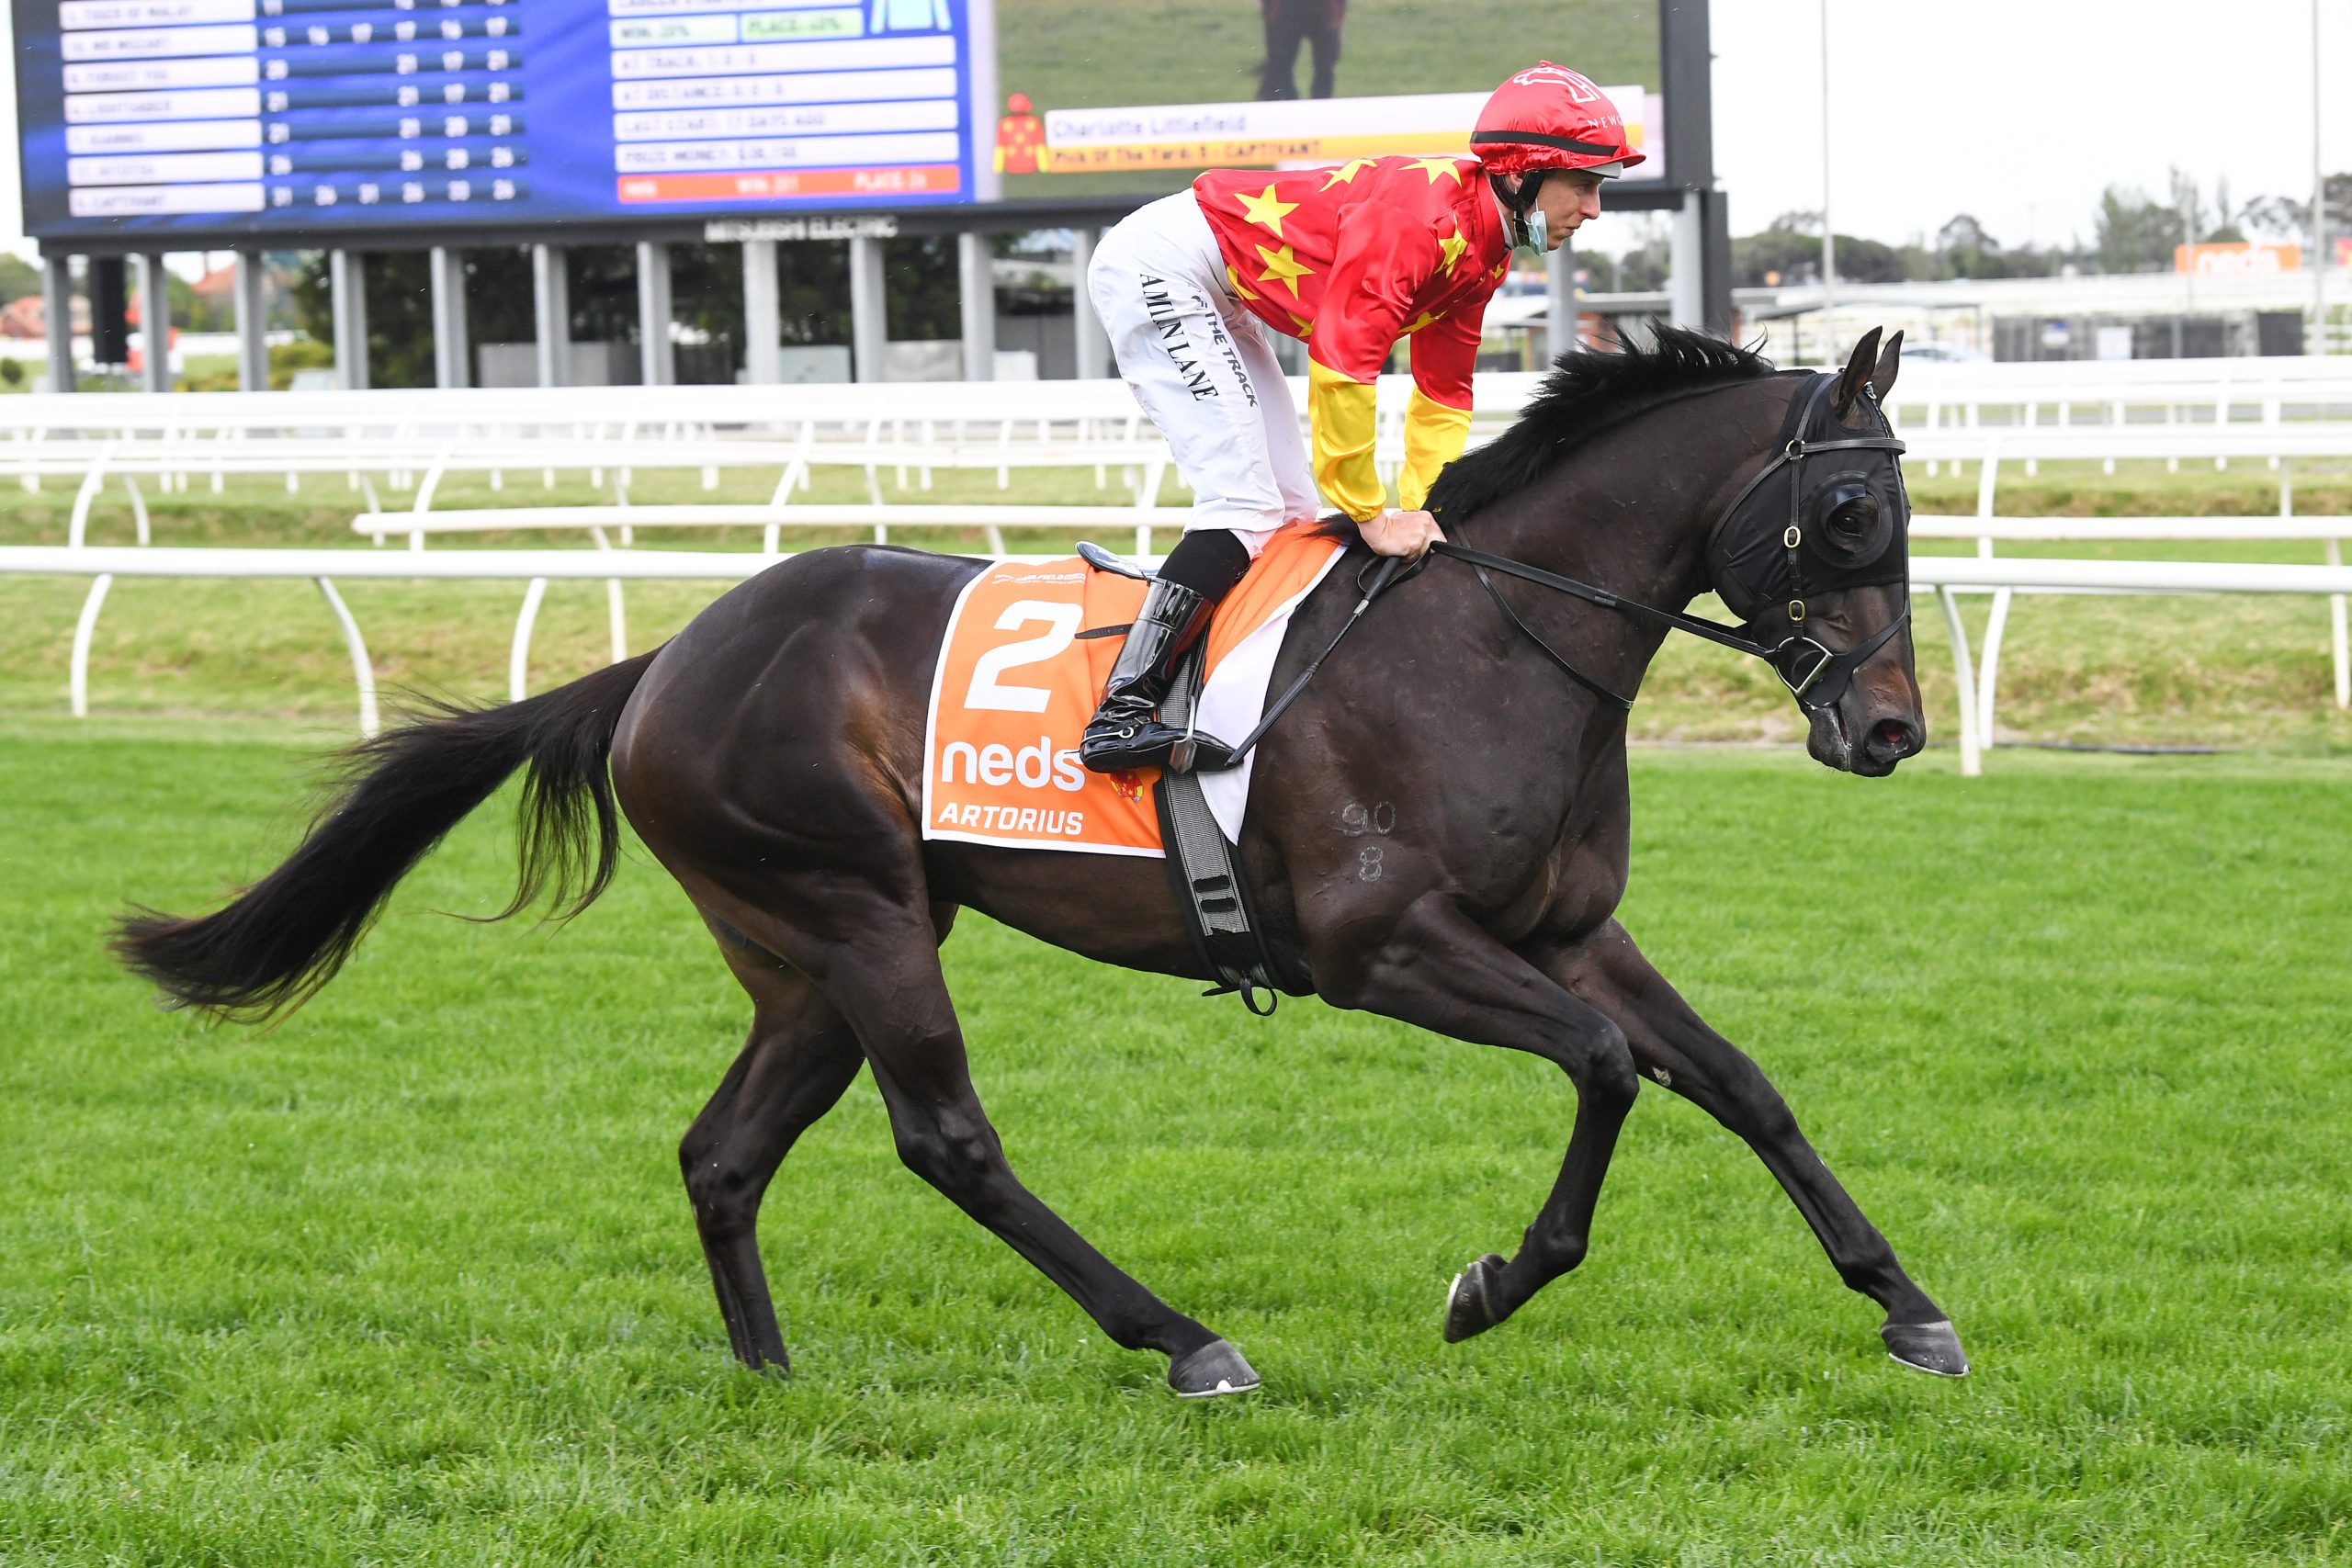 Artorius ridden by Damian Lane on the way to the barriers prior to the running of the Neds Caulfield Guineas at Caulfield Racecourse on October 09, 2021 in Caulfield, Australia. (Scott Barbour/Racing Photos)